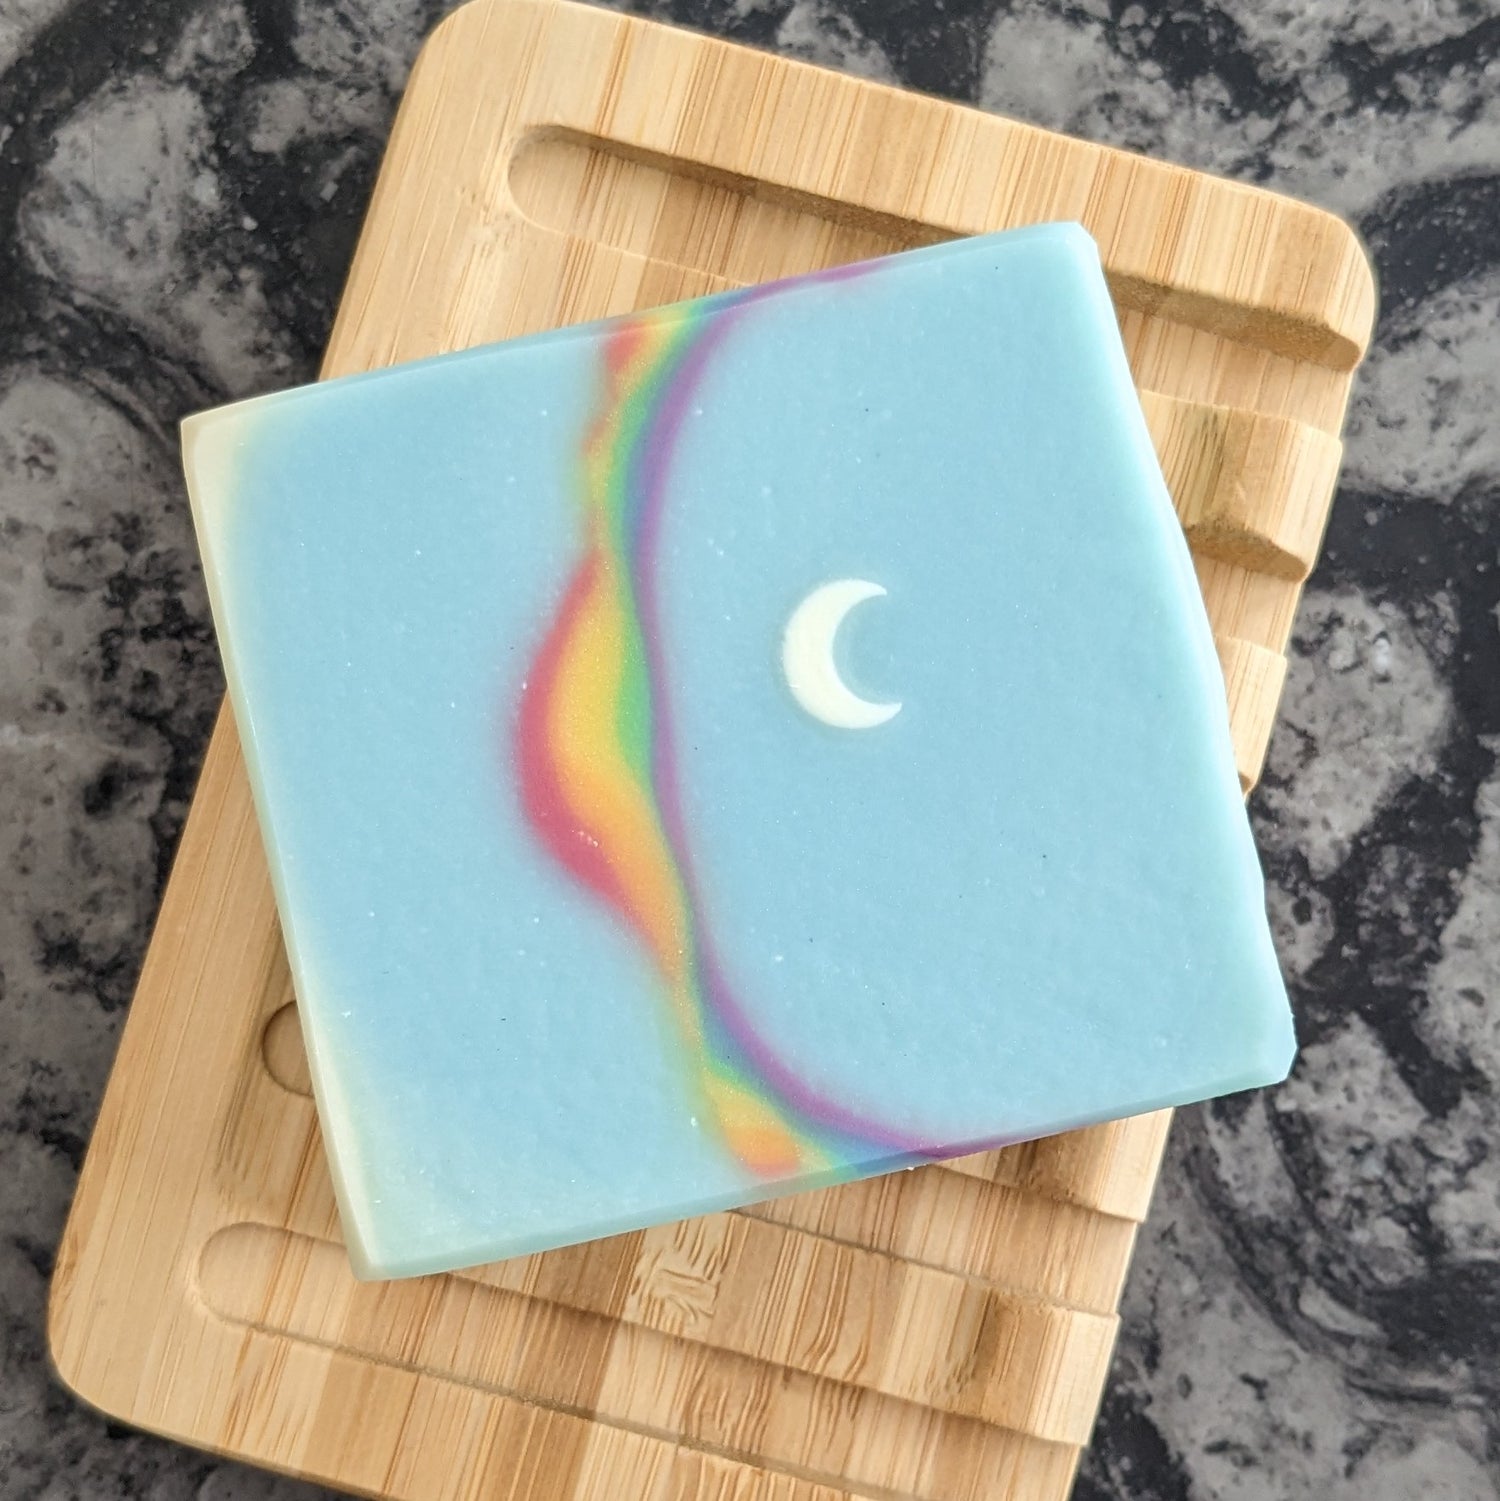 Soap with rainbow and moon on soap dish